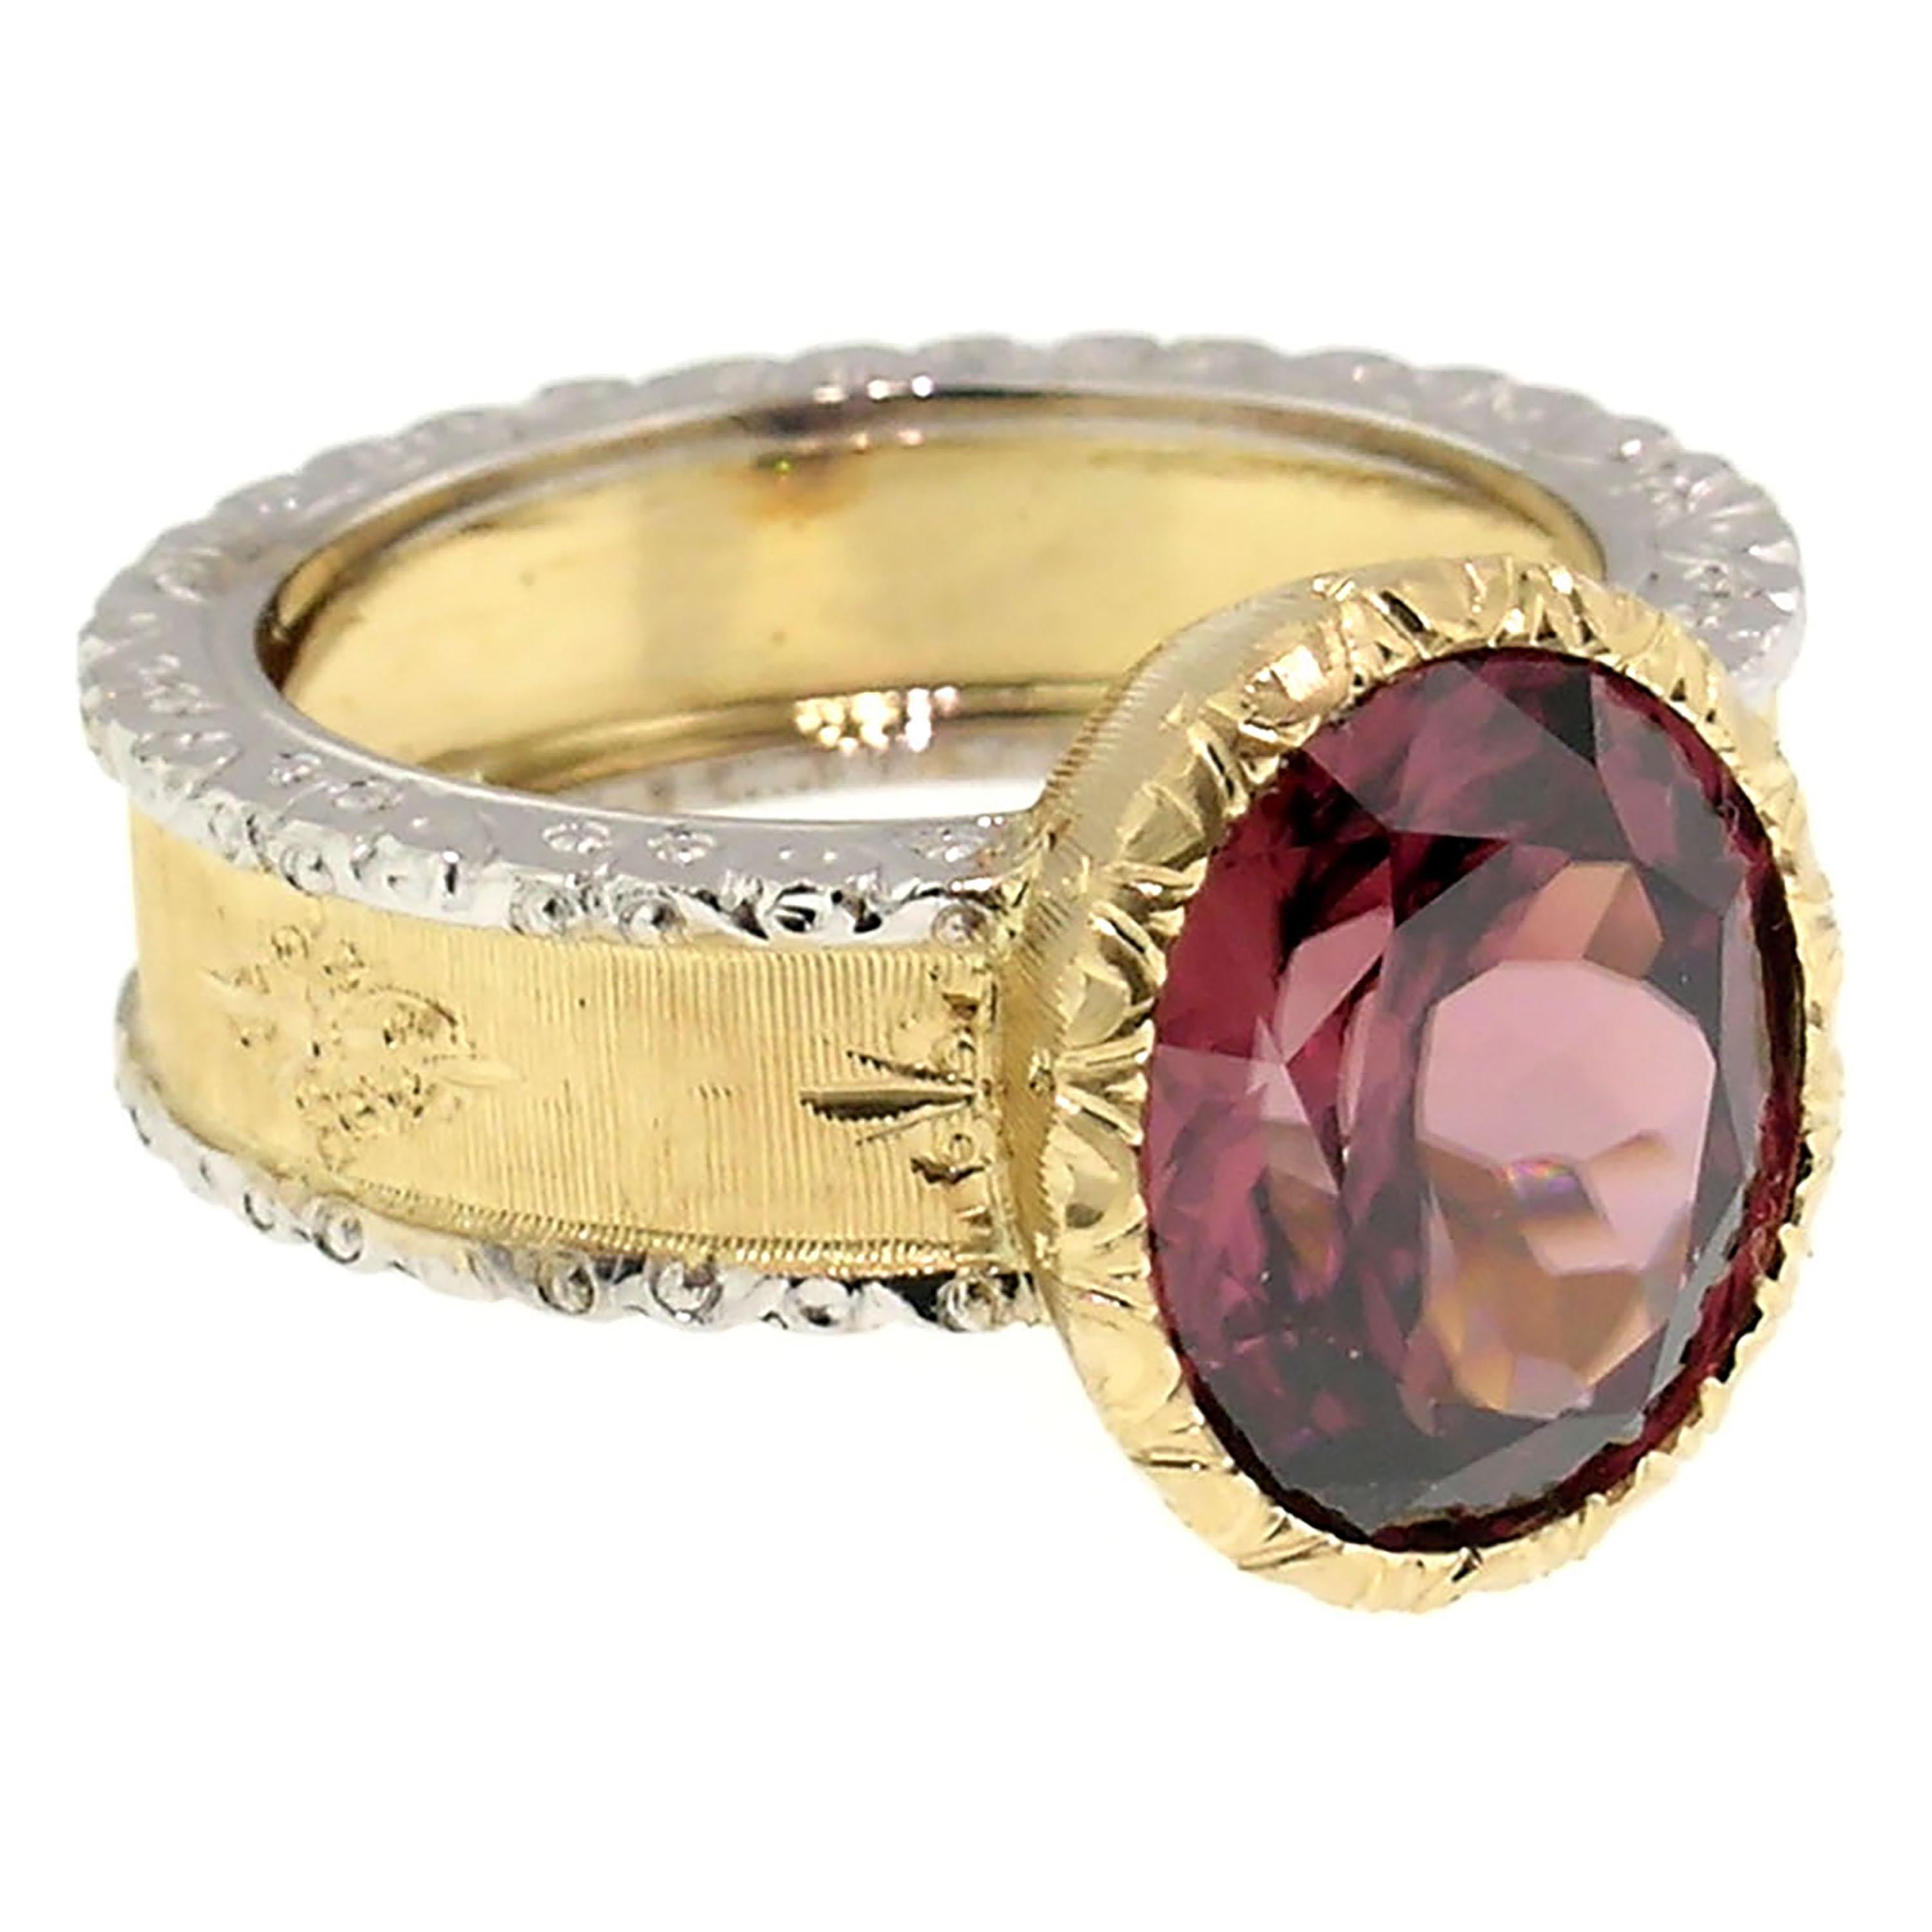 Oval Cut 18kt Hand Engraved Ring with Tanzanian Pink Zircon, Handmade in Florence, Italy